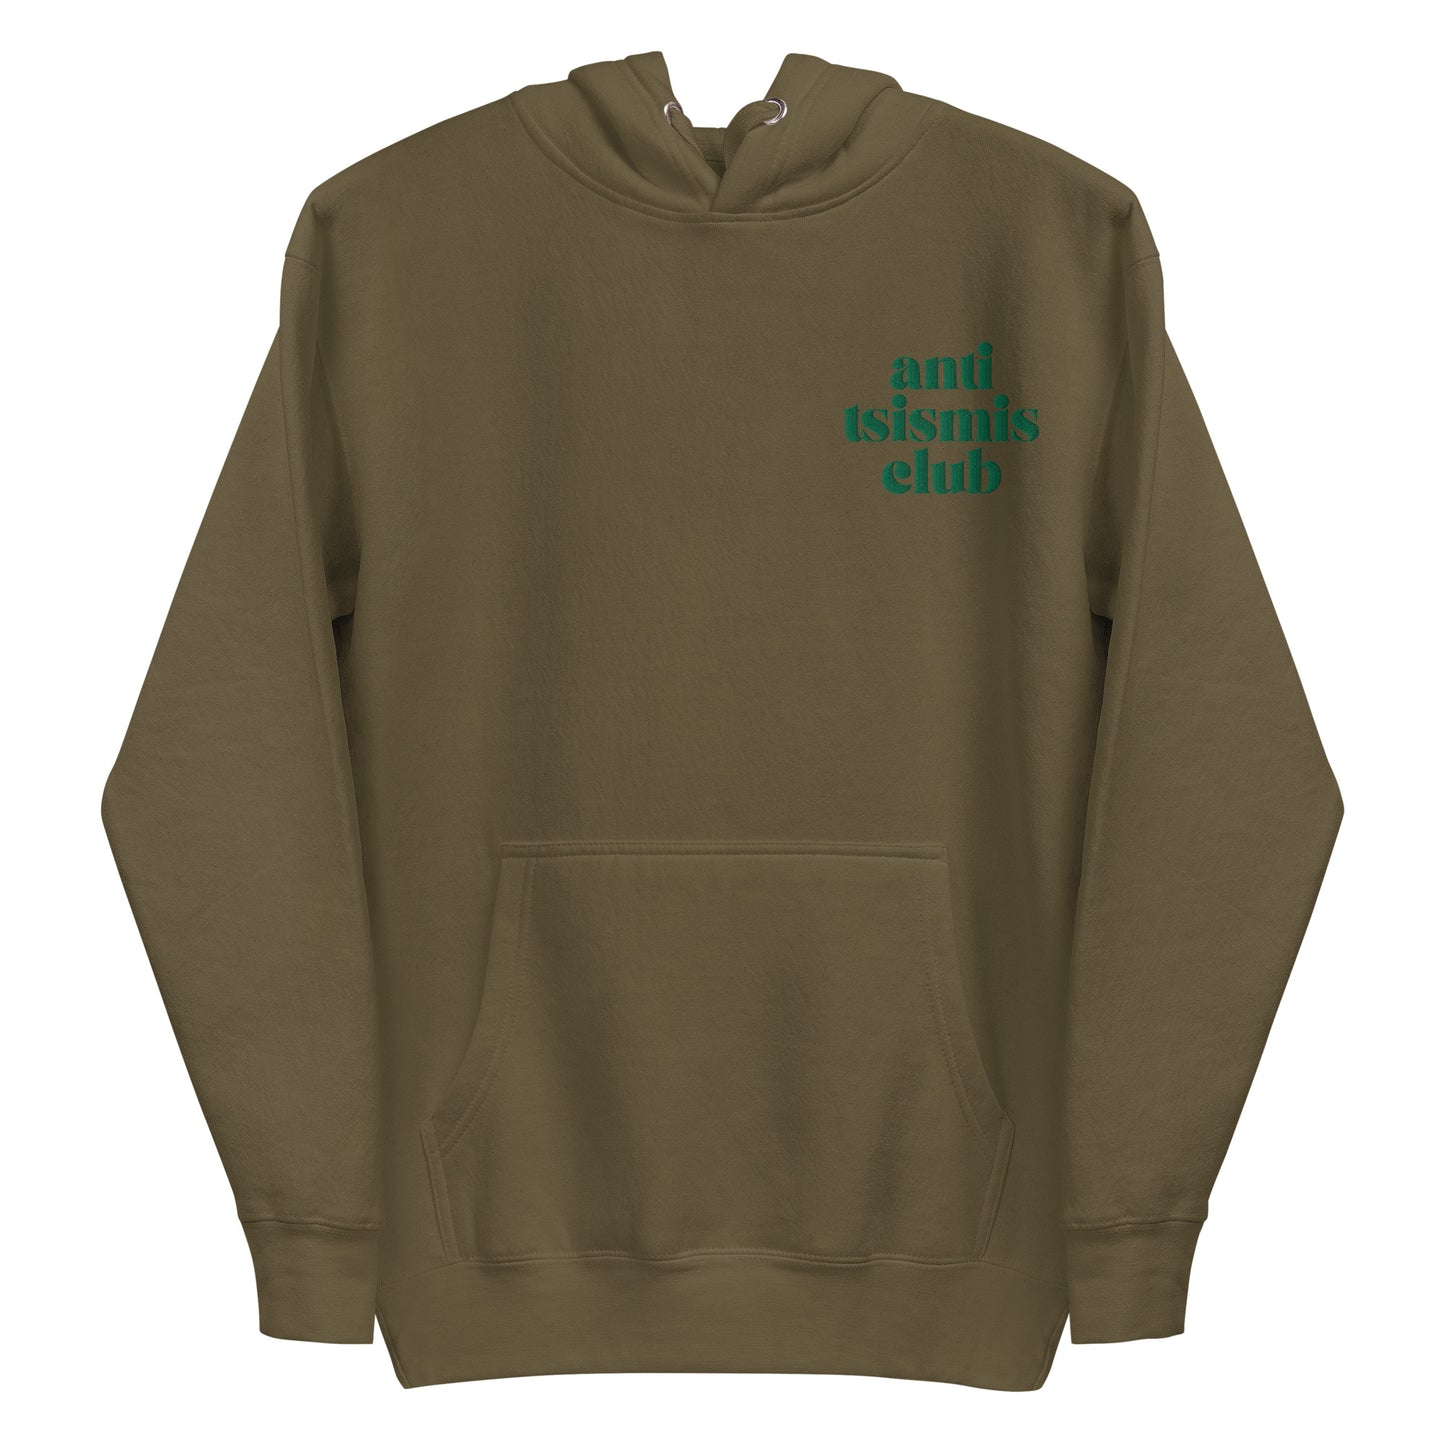 Filipino Hoodie Anti Tsismis Club Funny Embroidered Merch in color variant Green